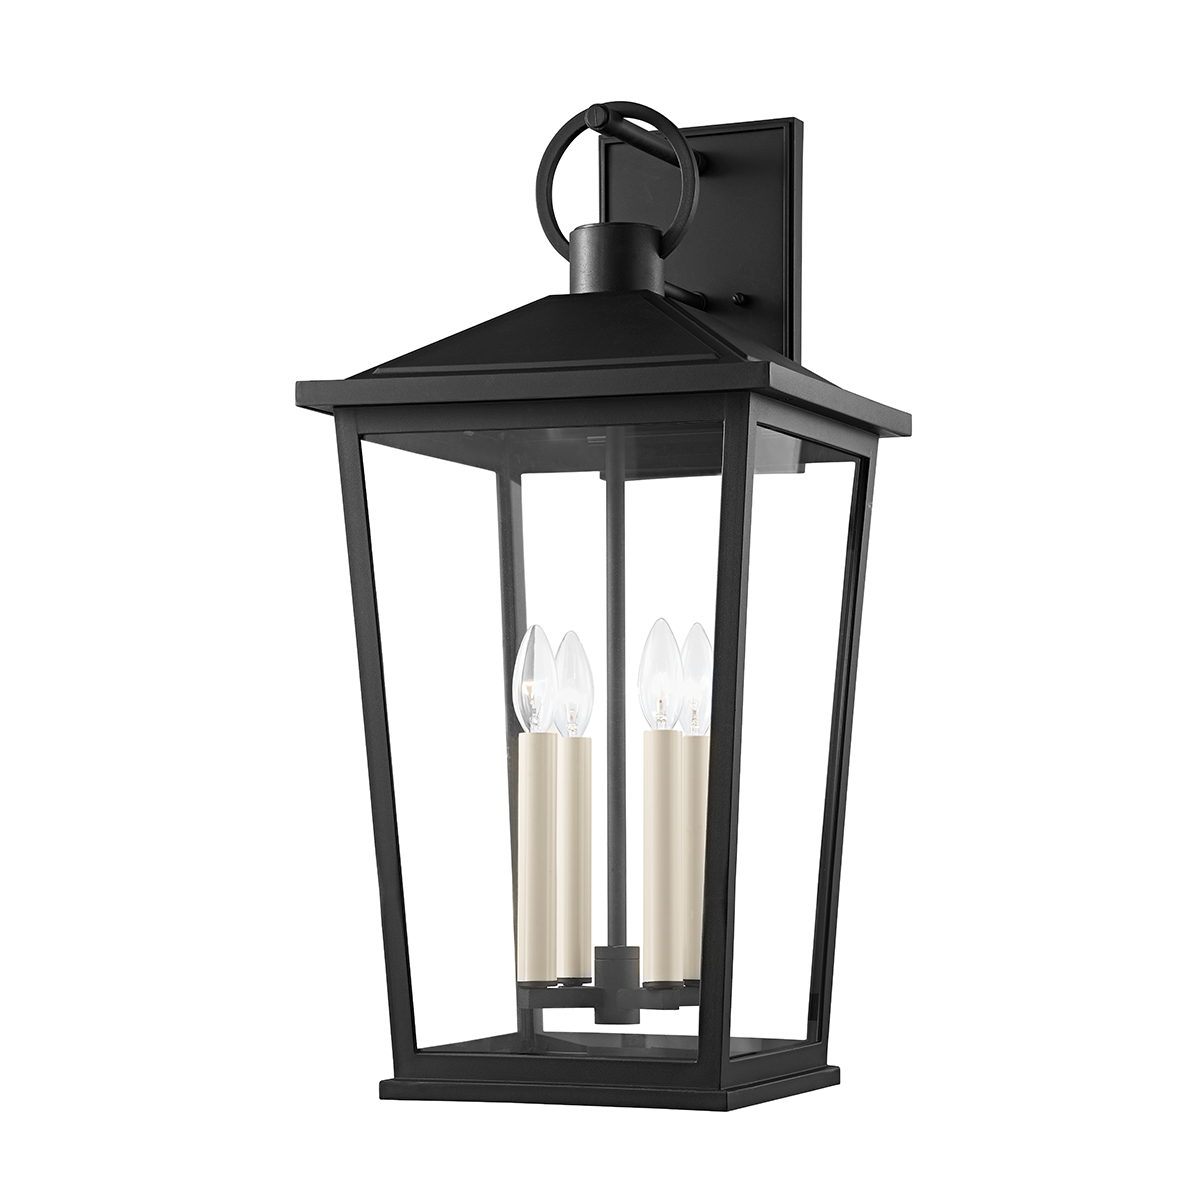 Troy SOREN 4 LIGHT EXTRA LARGE EXTERIOR WALL SCONCE B8904 Outdoor l Wall Troy Lighting TEXTURE BLACK  